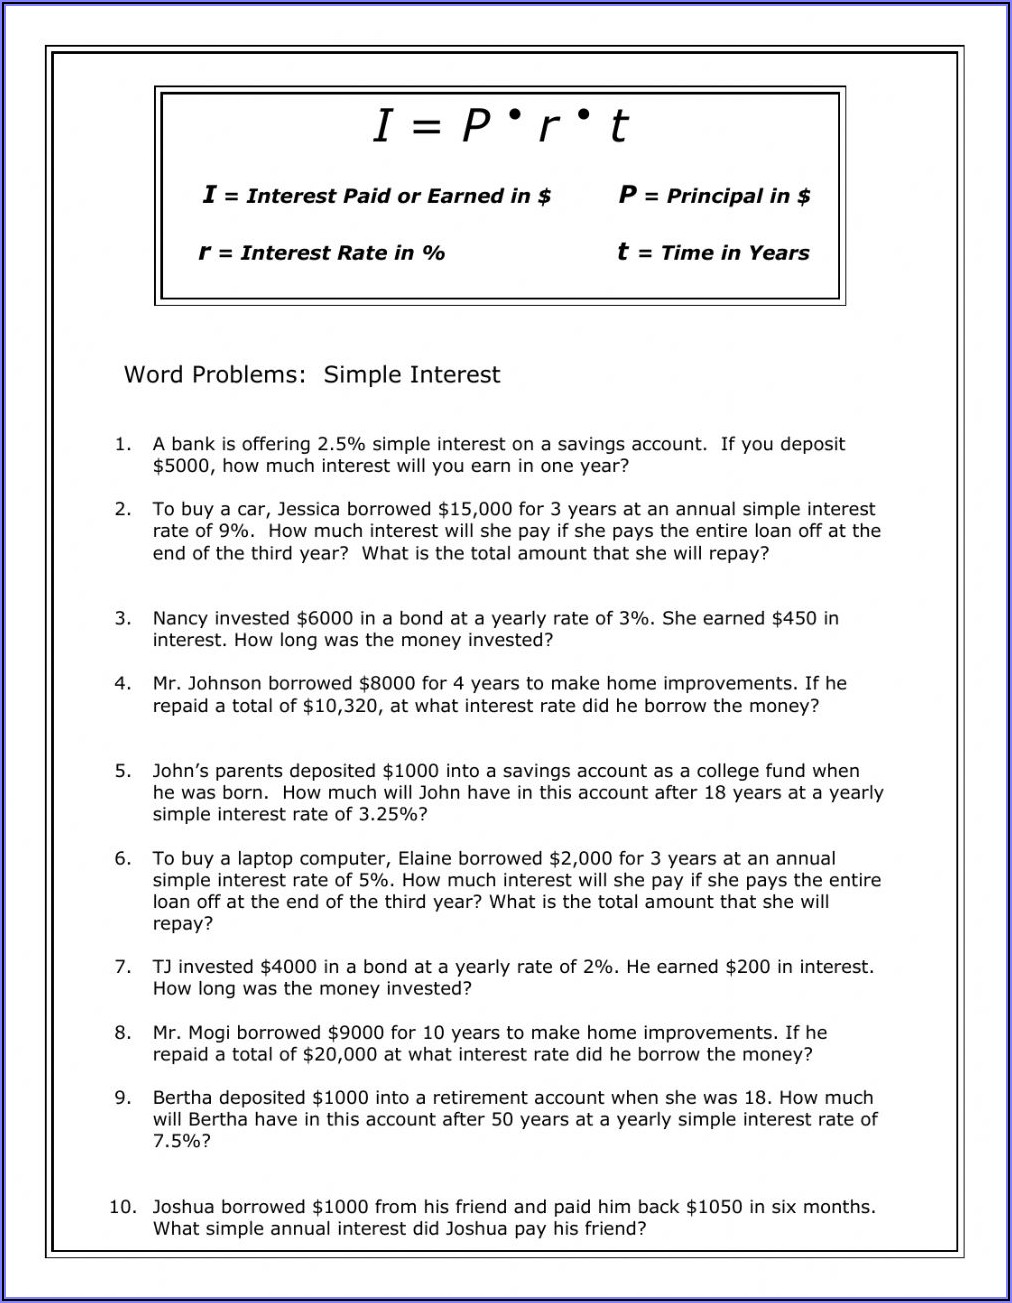 Simple Interest Worksheet Math.about.com Answers